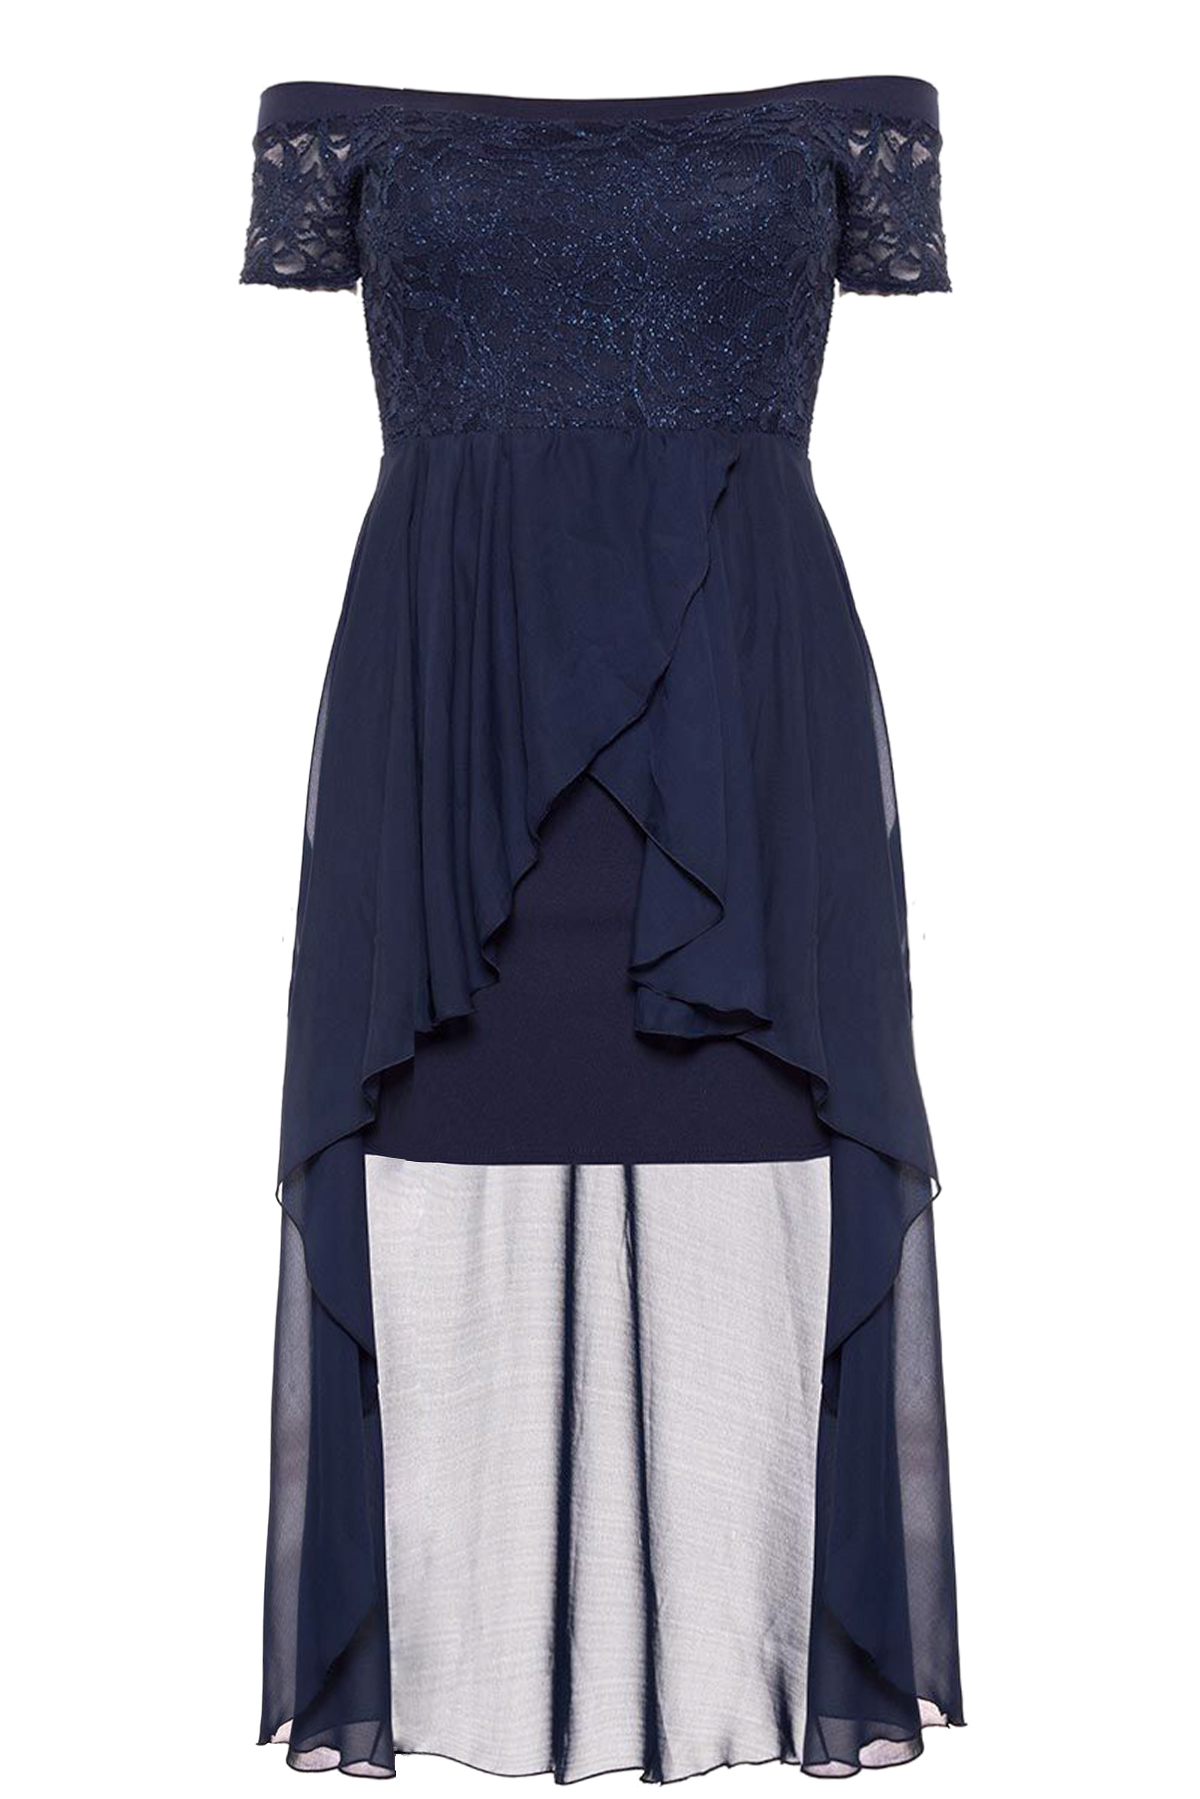 quiz navy and silver lace dip hem dress